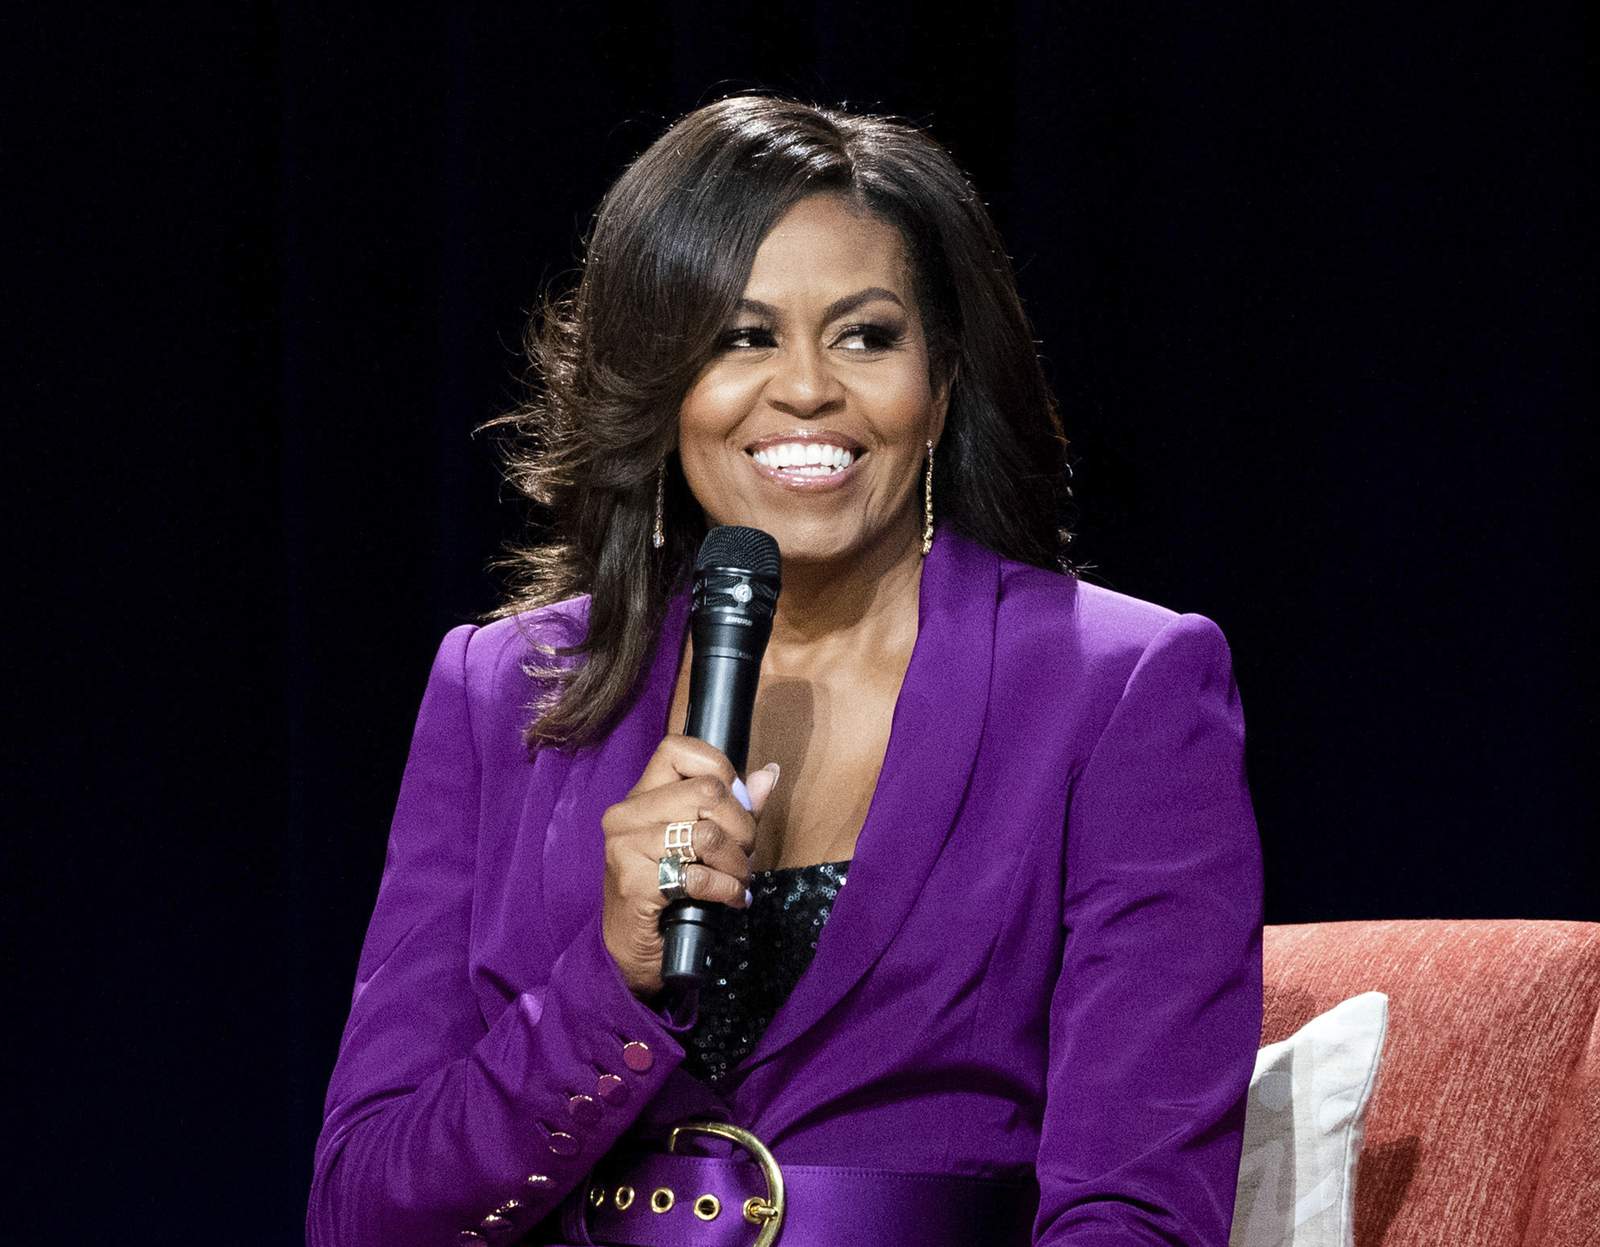 Aide: Michelle Obama to stress Biden's competency, character